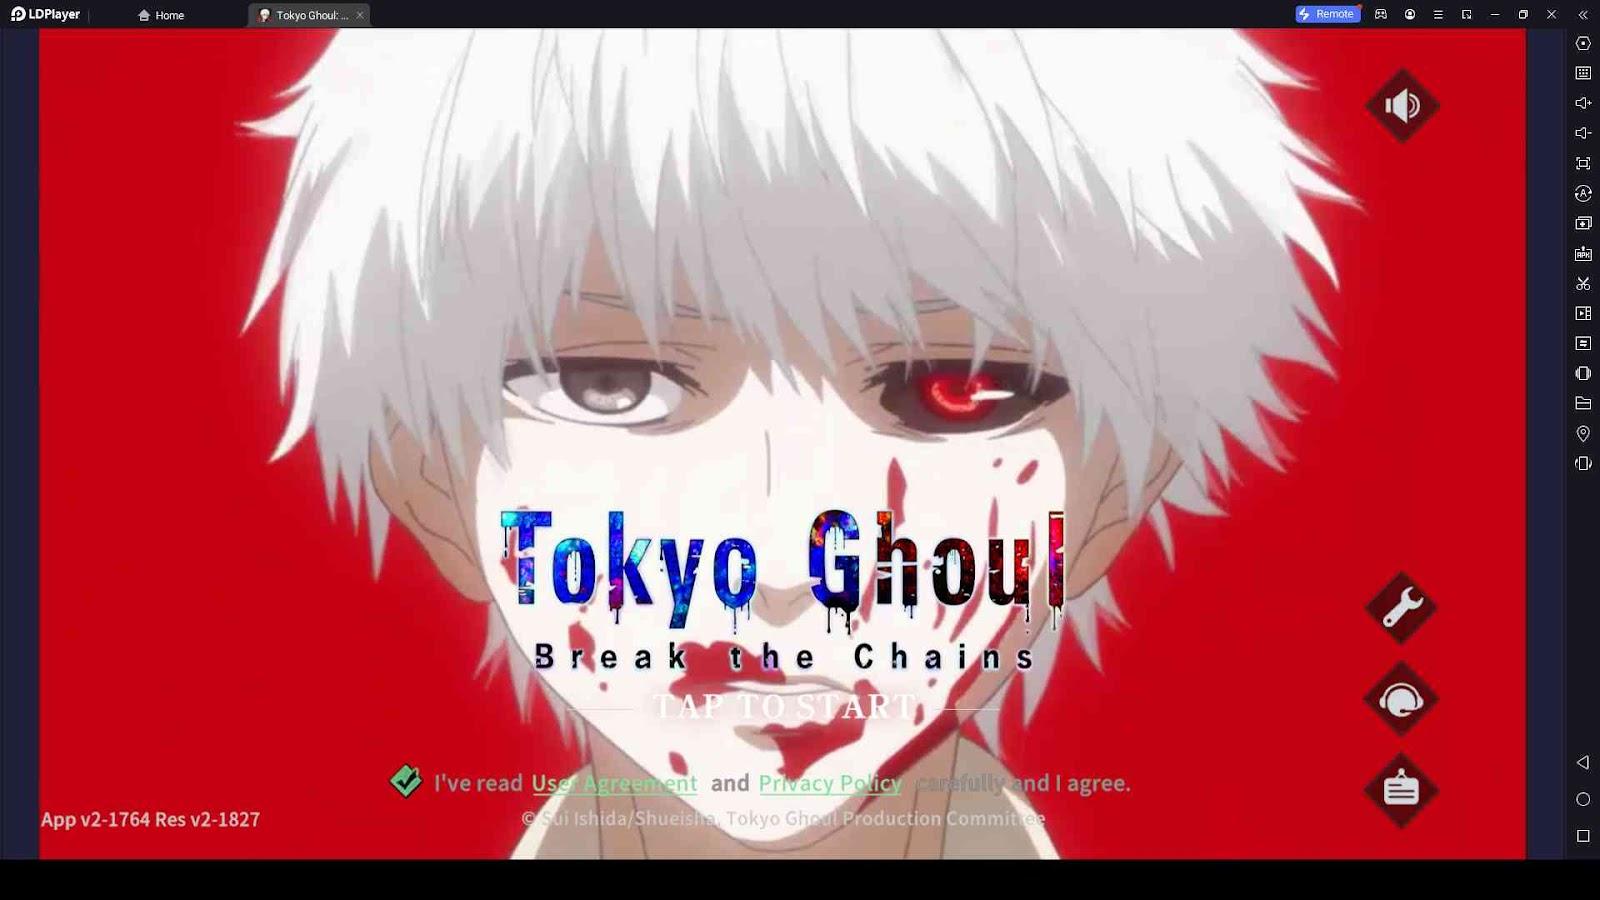 Tokyo Ghoul Break the Chains codes